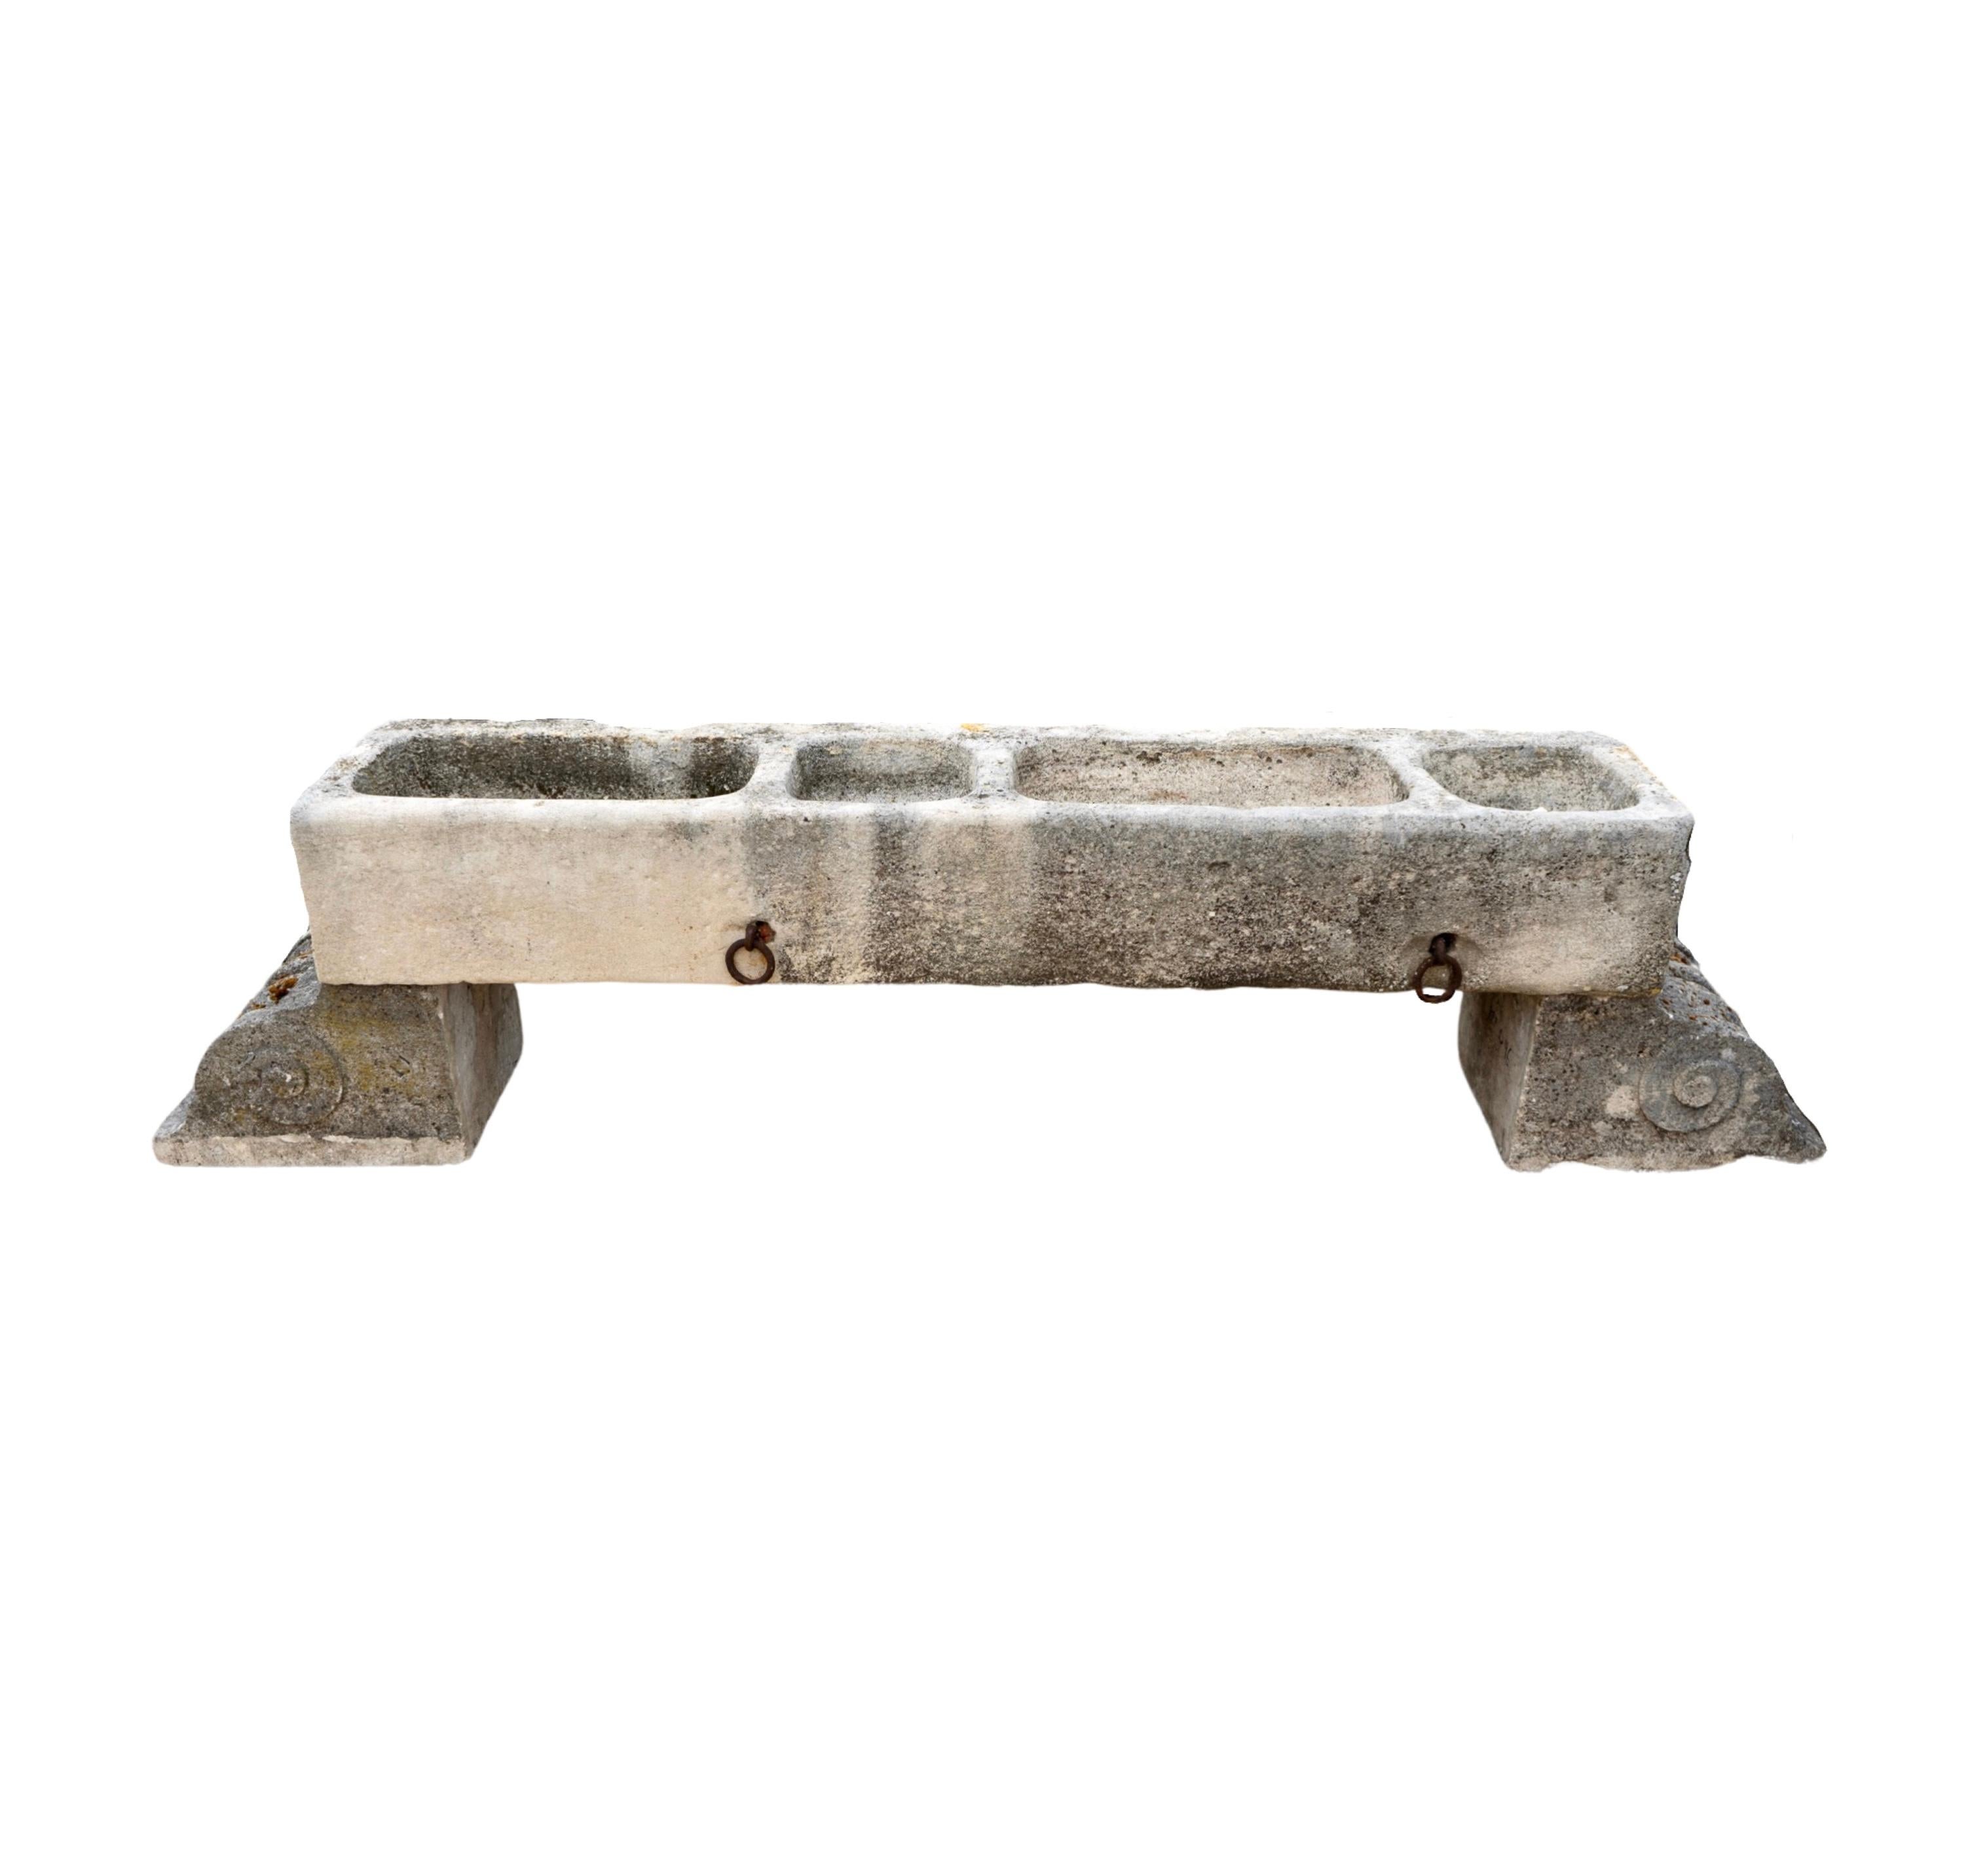 This French Limestone Trough is a 17th-century treasure, expertly carved with four basins for efficient use. It also features two sturdy limestone bases, making it both functional and visually appealing. Additionally, the predrilled holes allow for